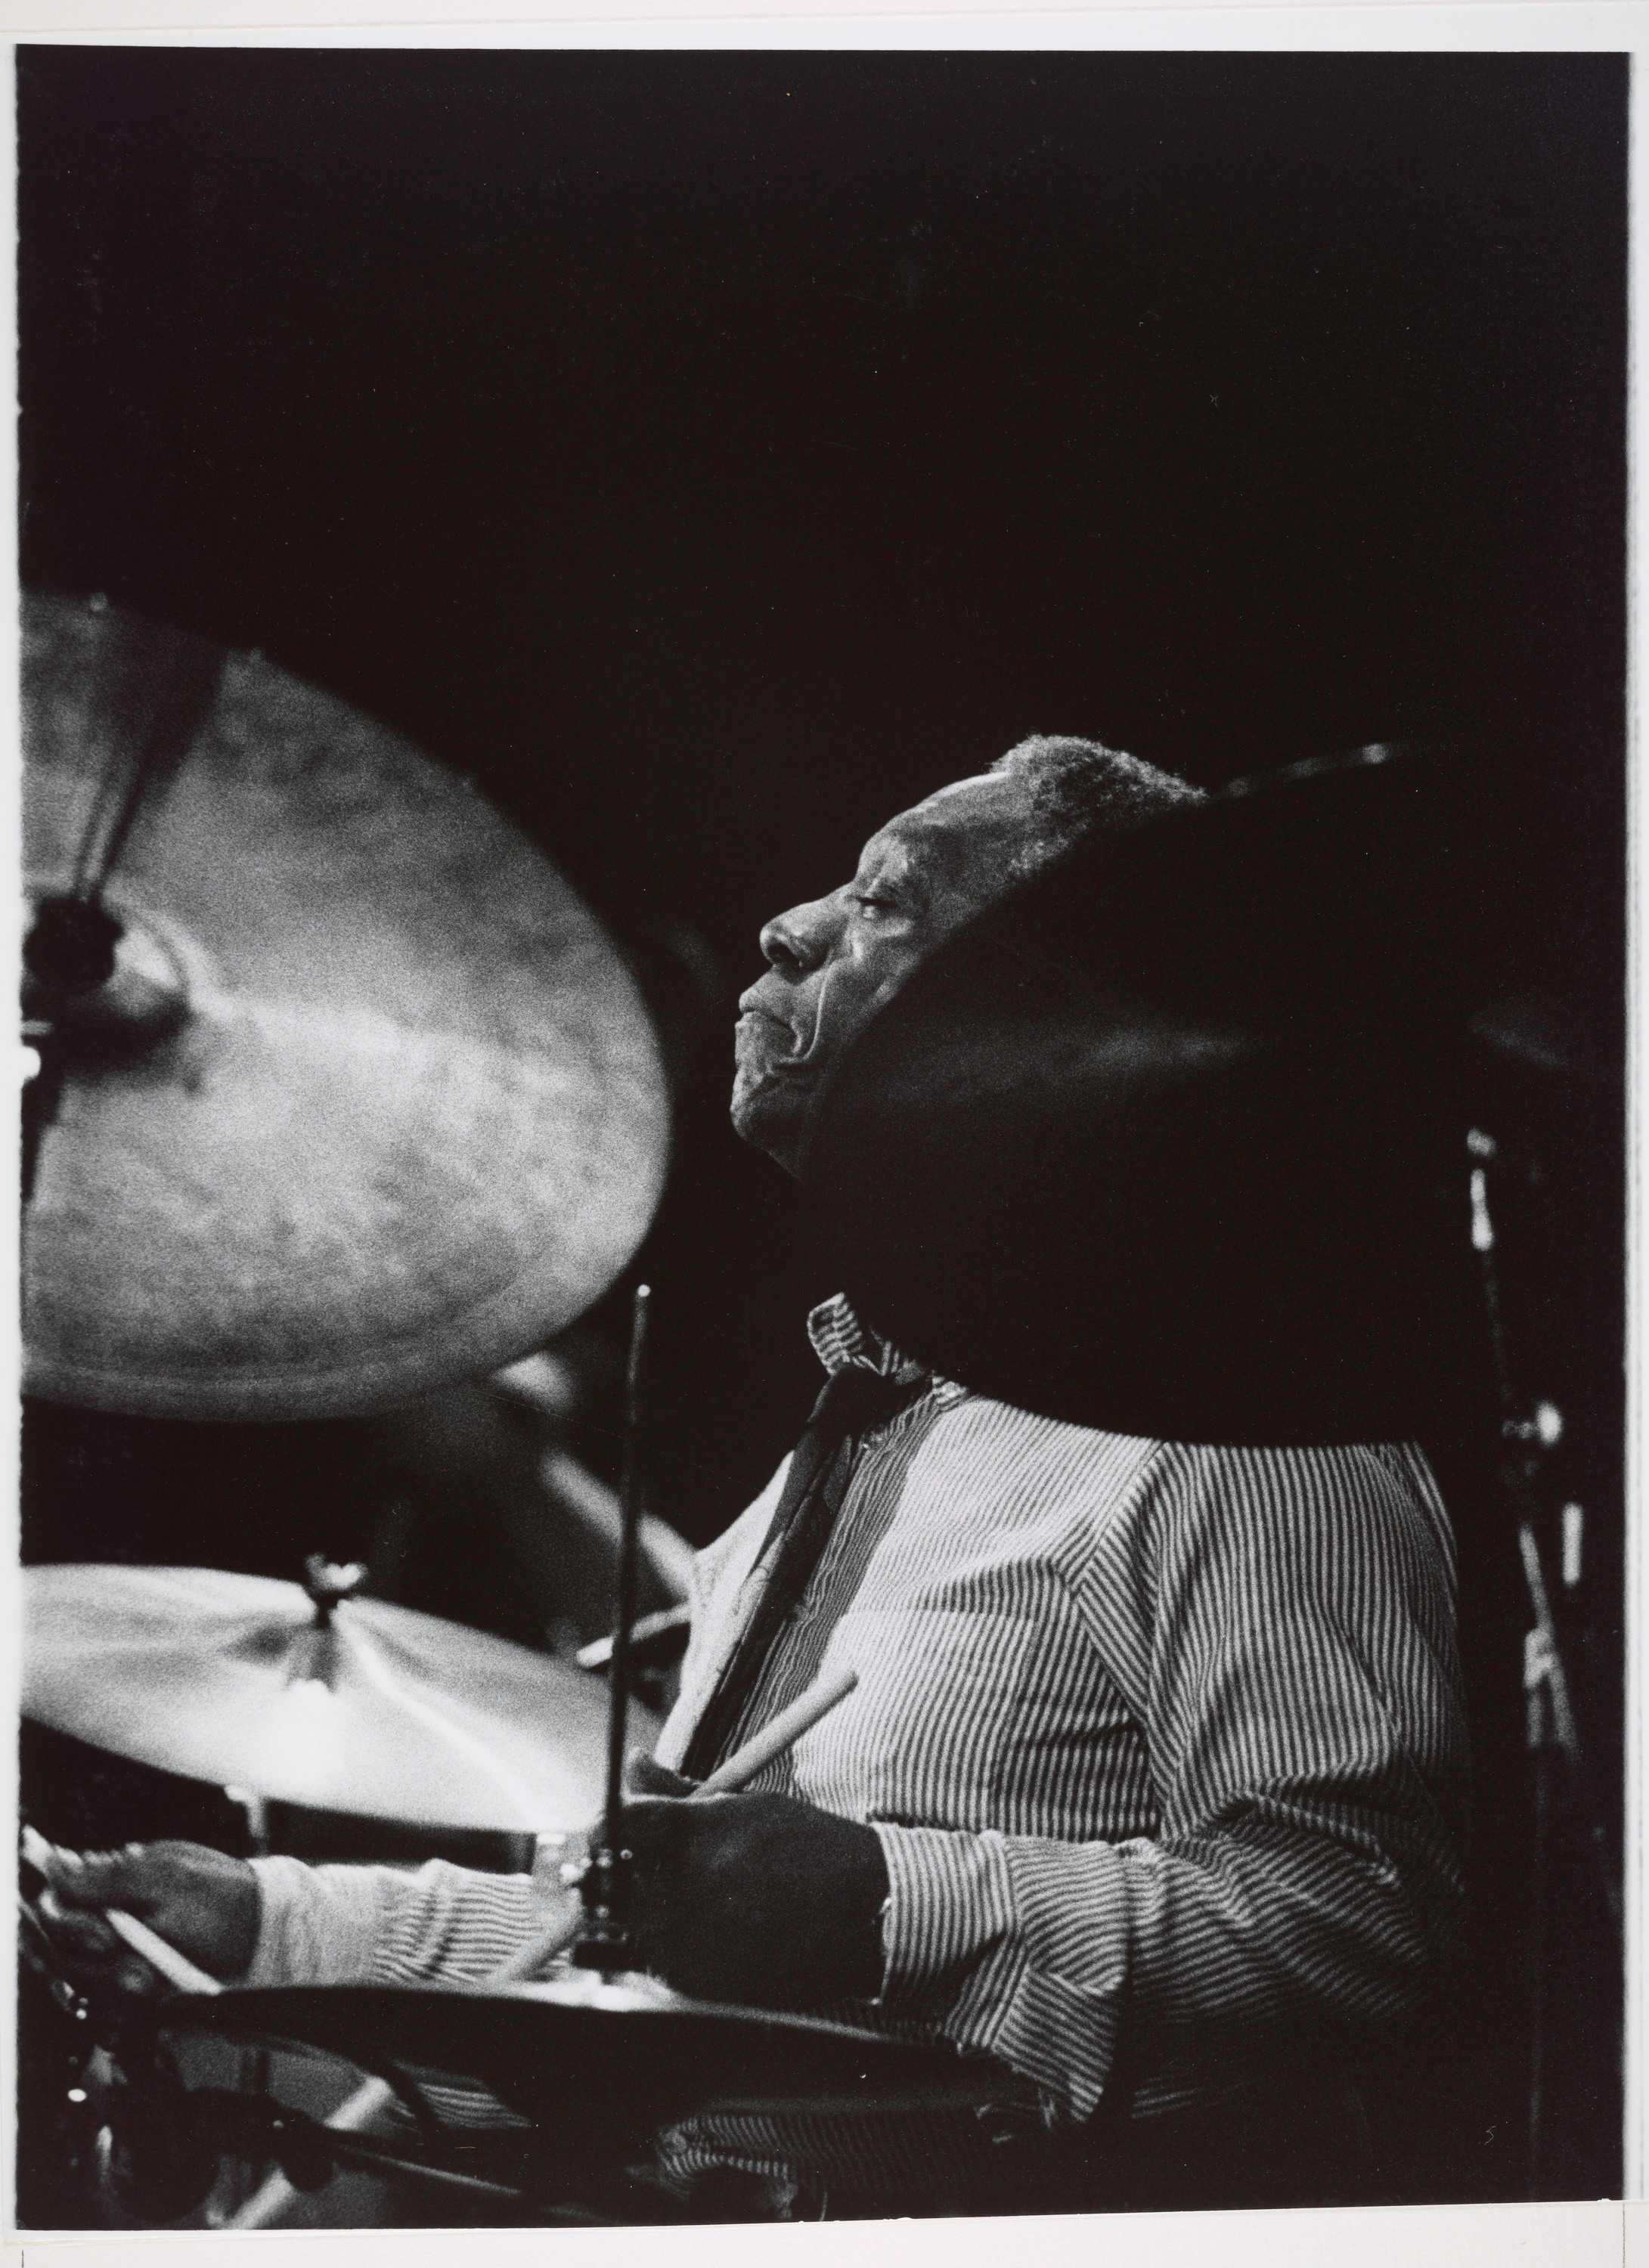 A black-and-white photograph of jazz musician and bandleader Art Blakey playing drums during a 1980 performance. Blakey is photographed in left-profile through his drumkit, with a cymbal partly obscuring his face. His eyes are closed and he wears a striped dress shirt and dark tie.